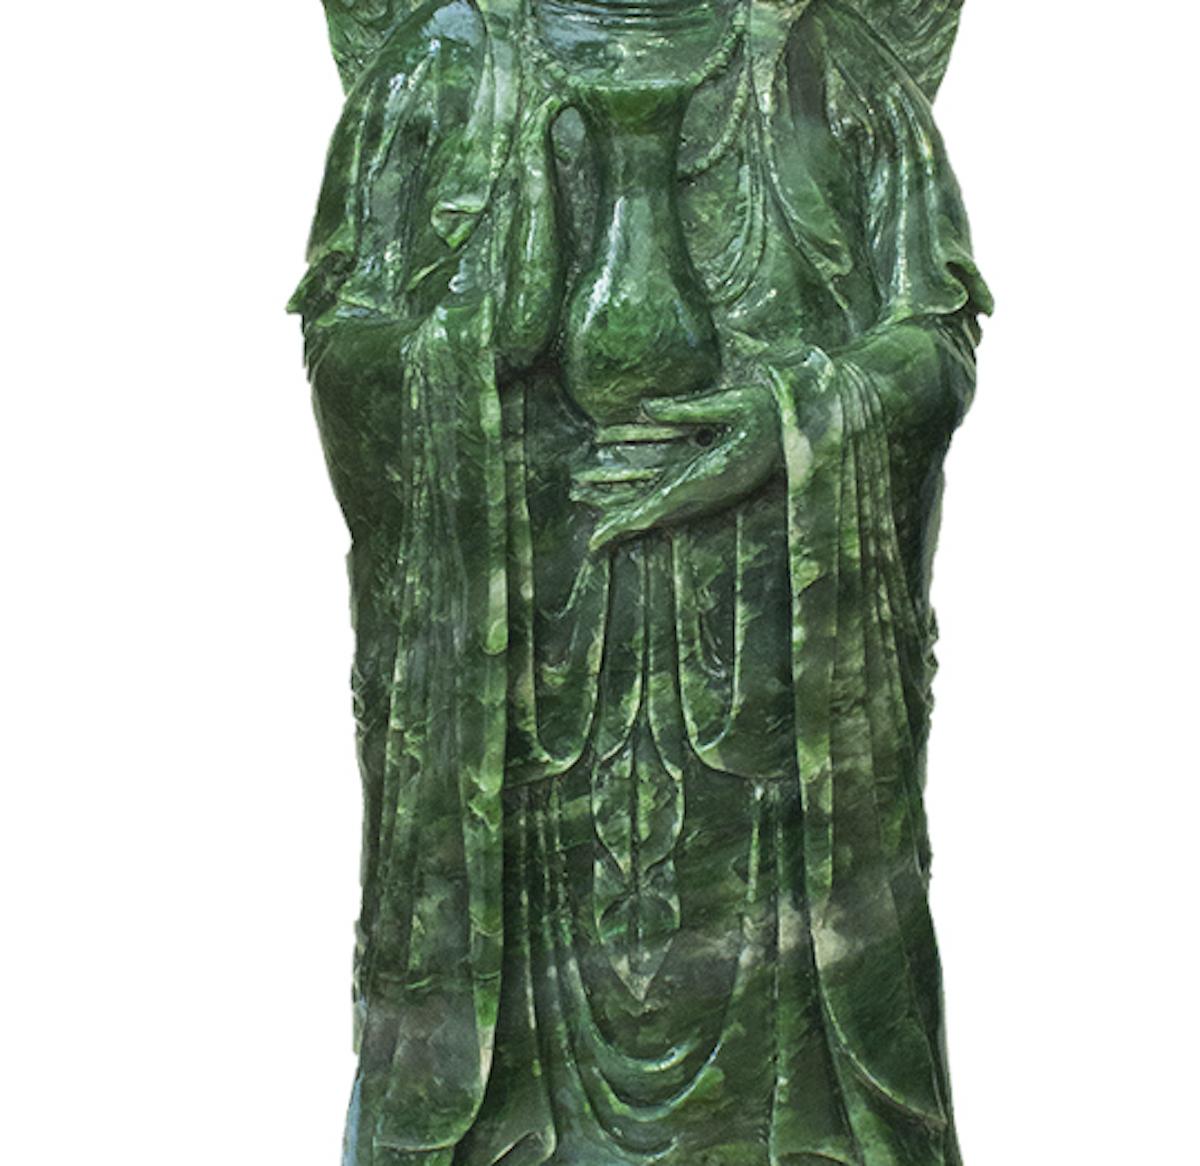 green carving stone